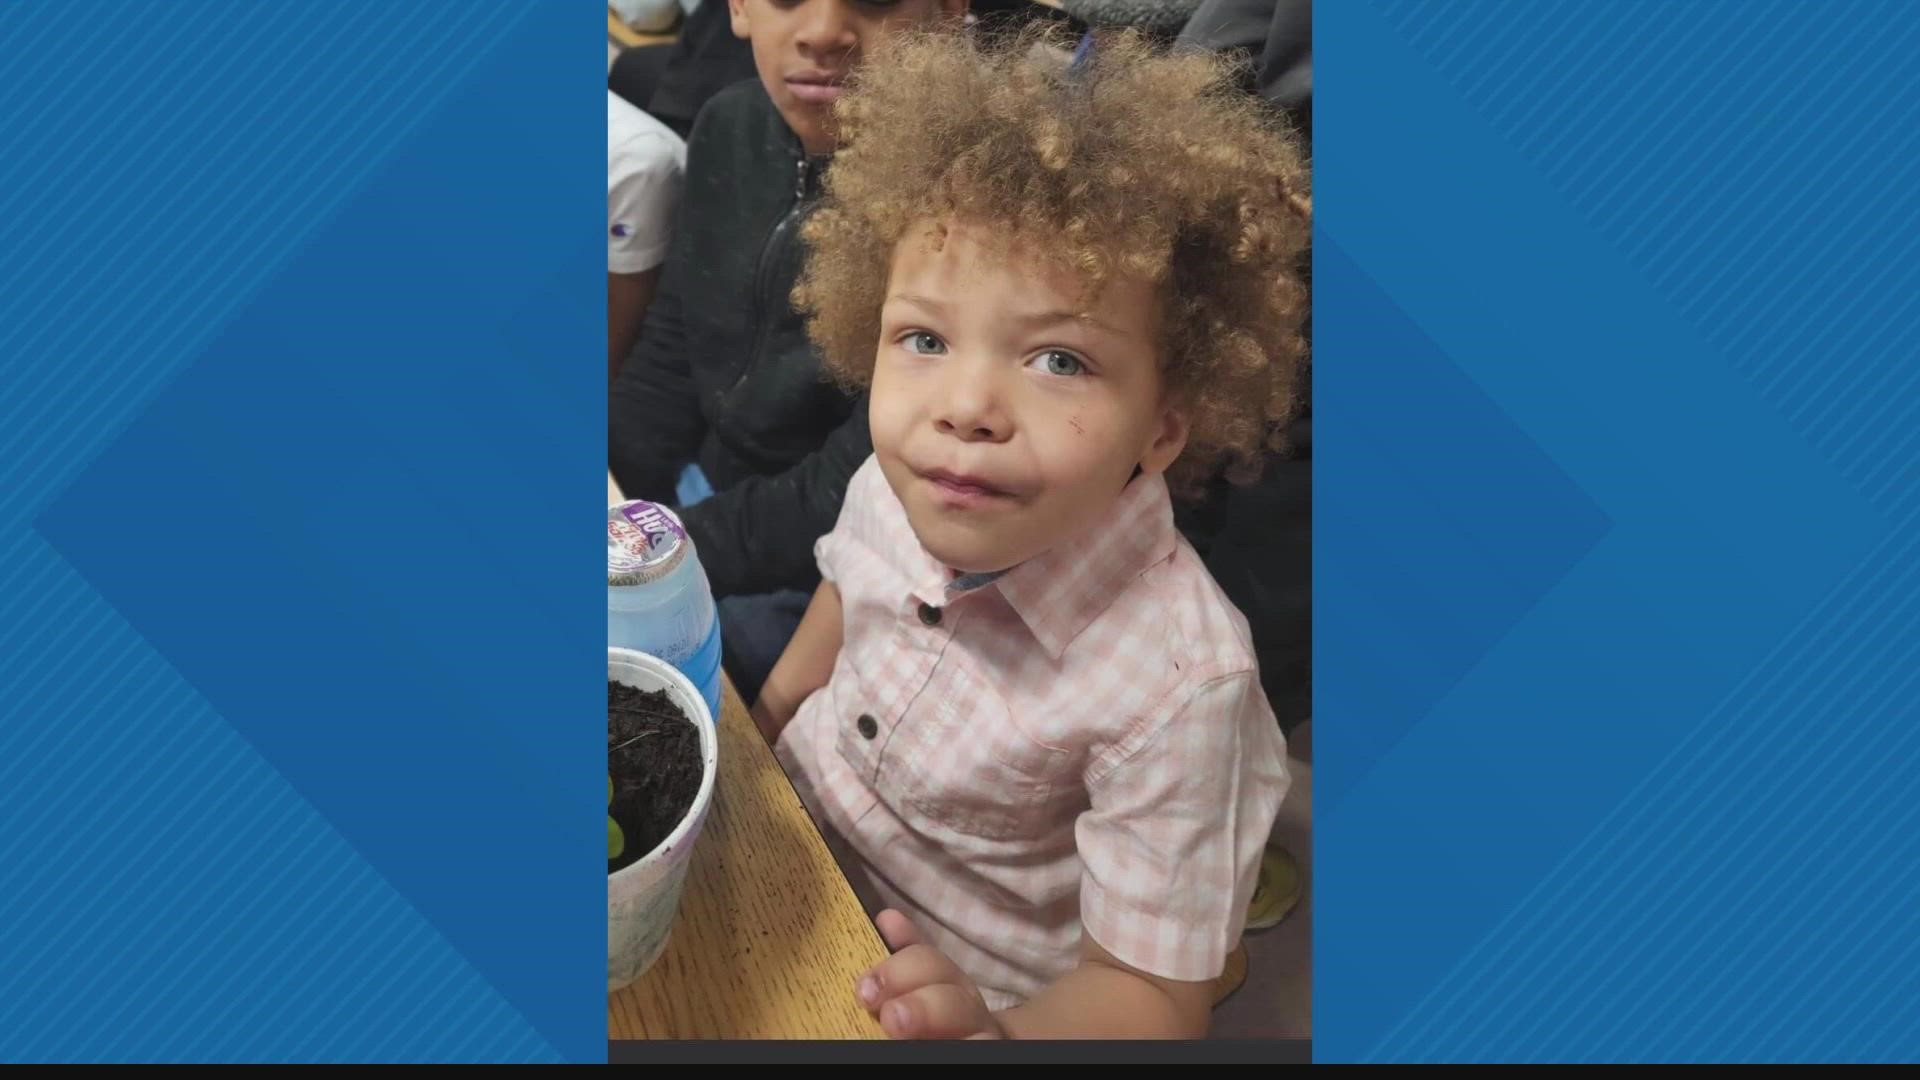 Two children were taken to St. Louis Children's Hospital. The 3-year-old boy has severe brain damage from the bullet and is on life support.